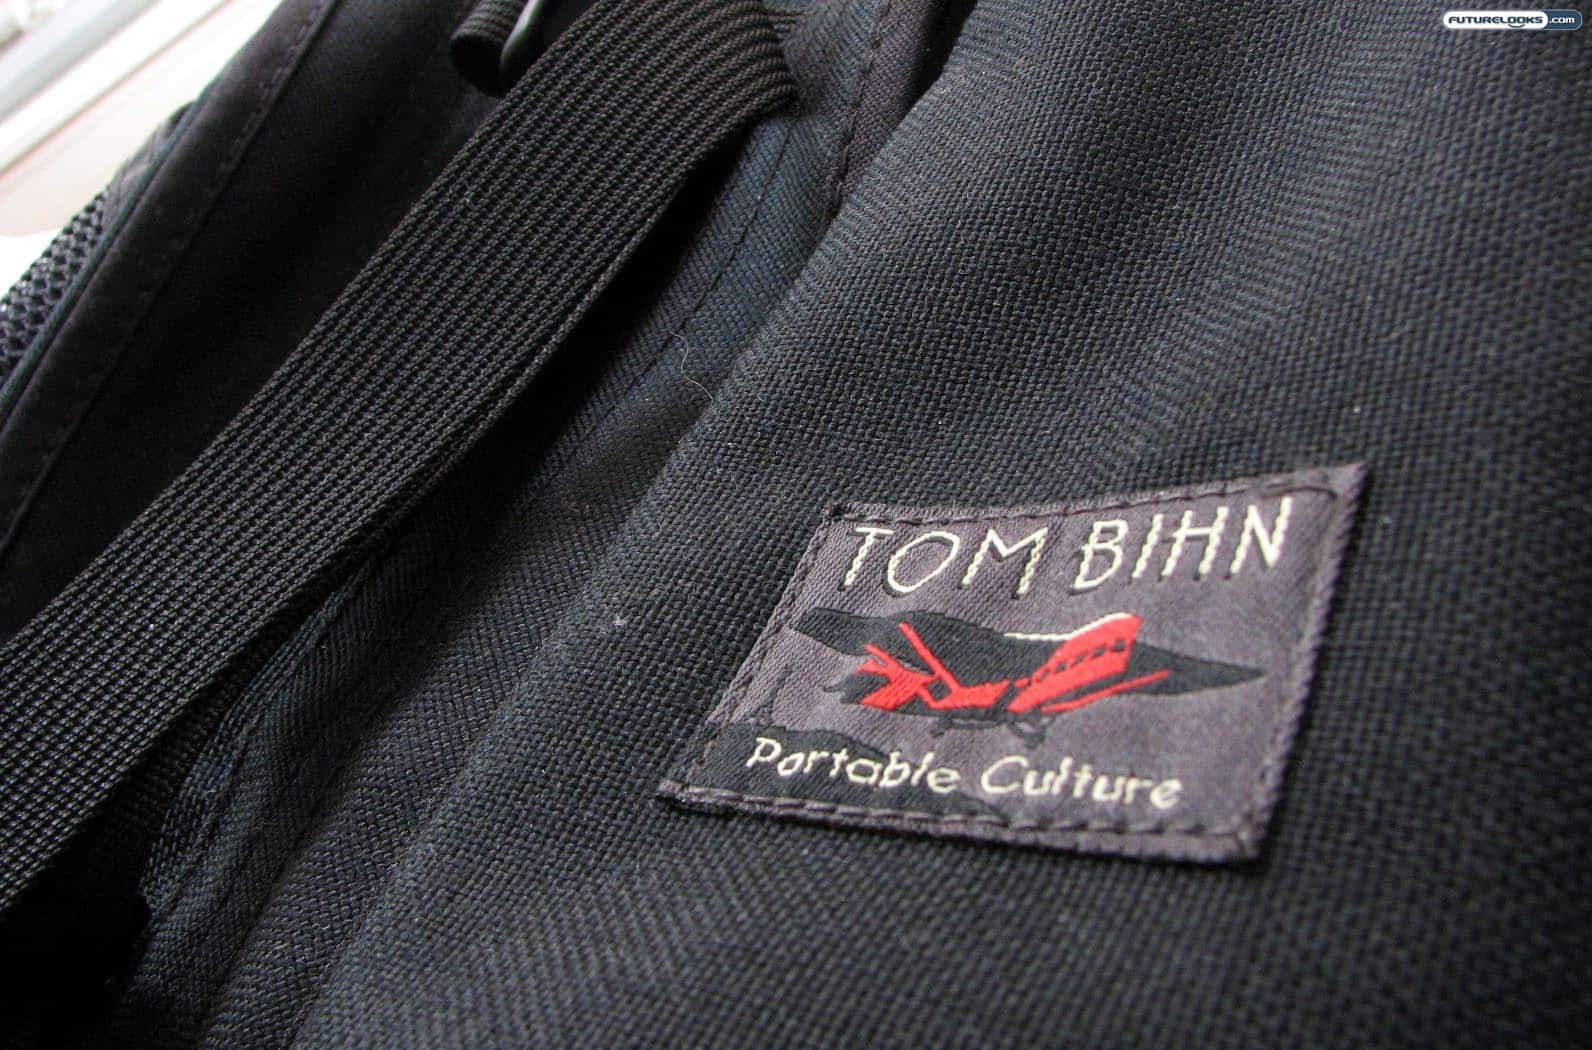 Brain Bag and accessories - TOM BIHN Forums